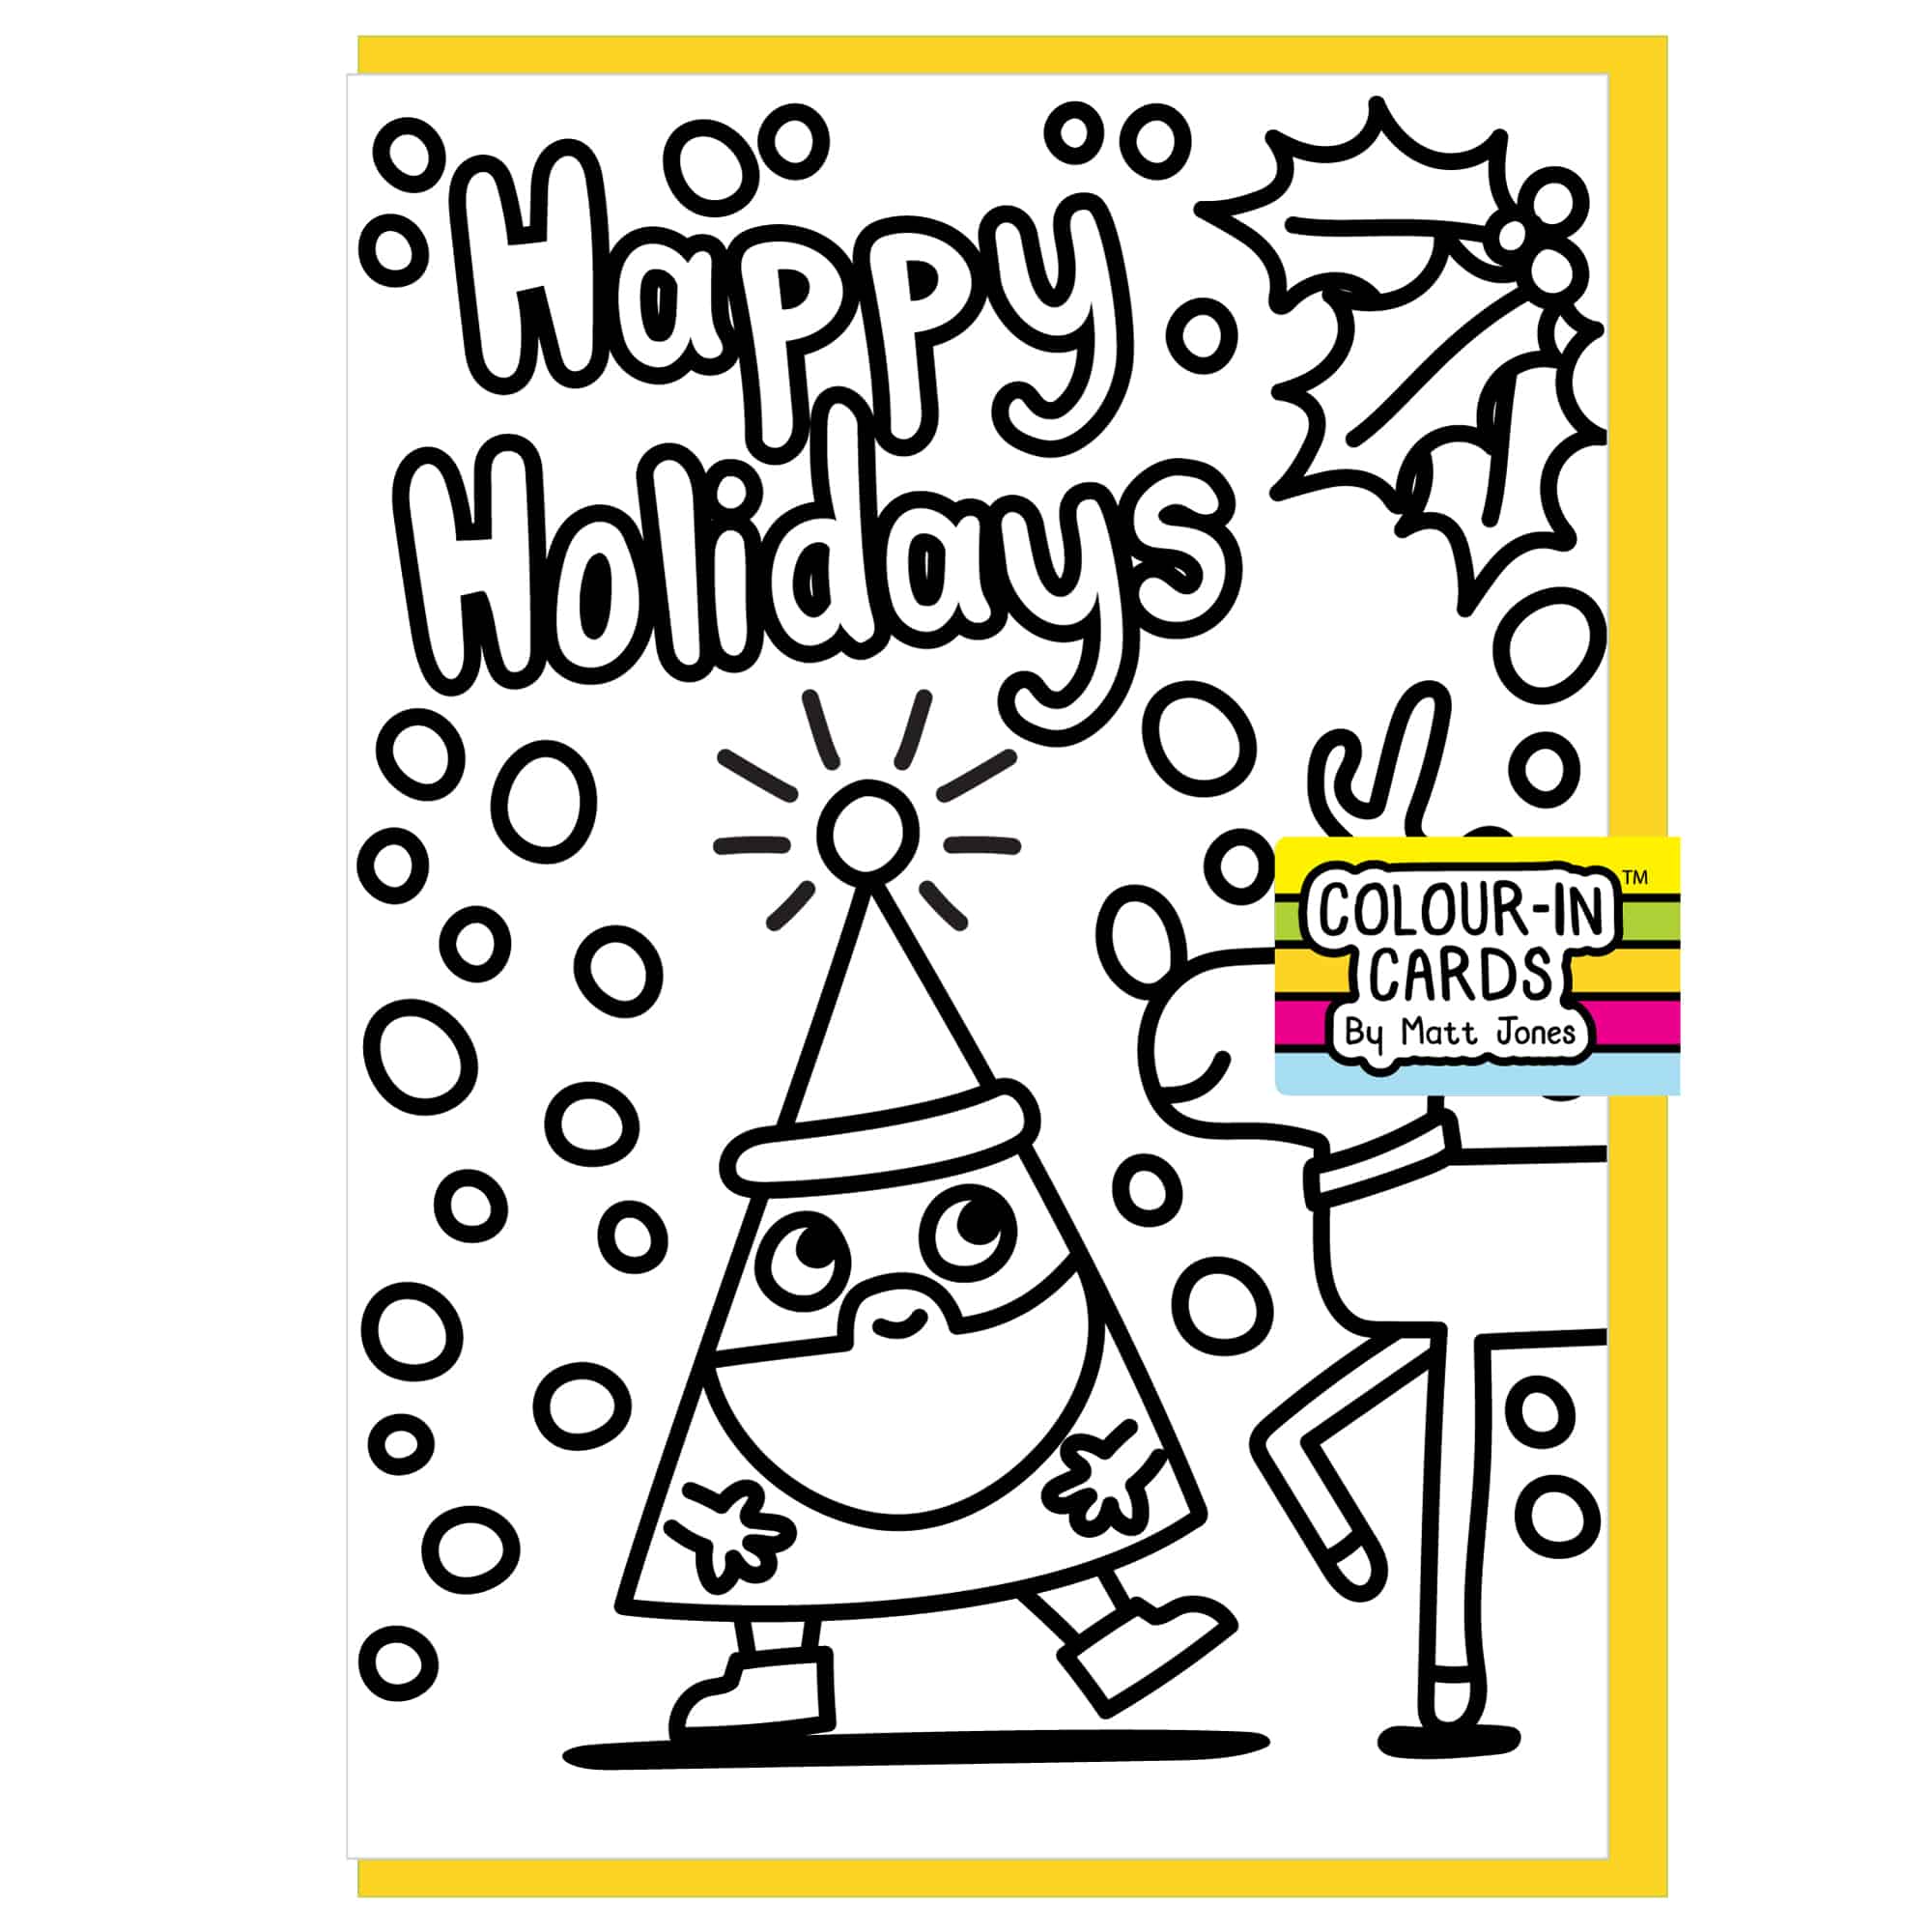 happy-holidays-colour-in-greeting-card-lunartik